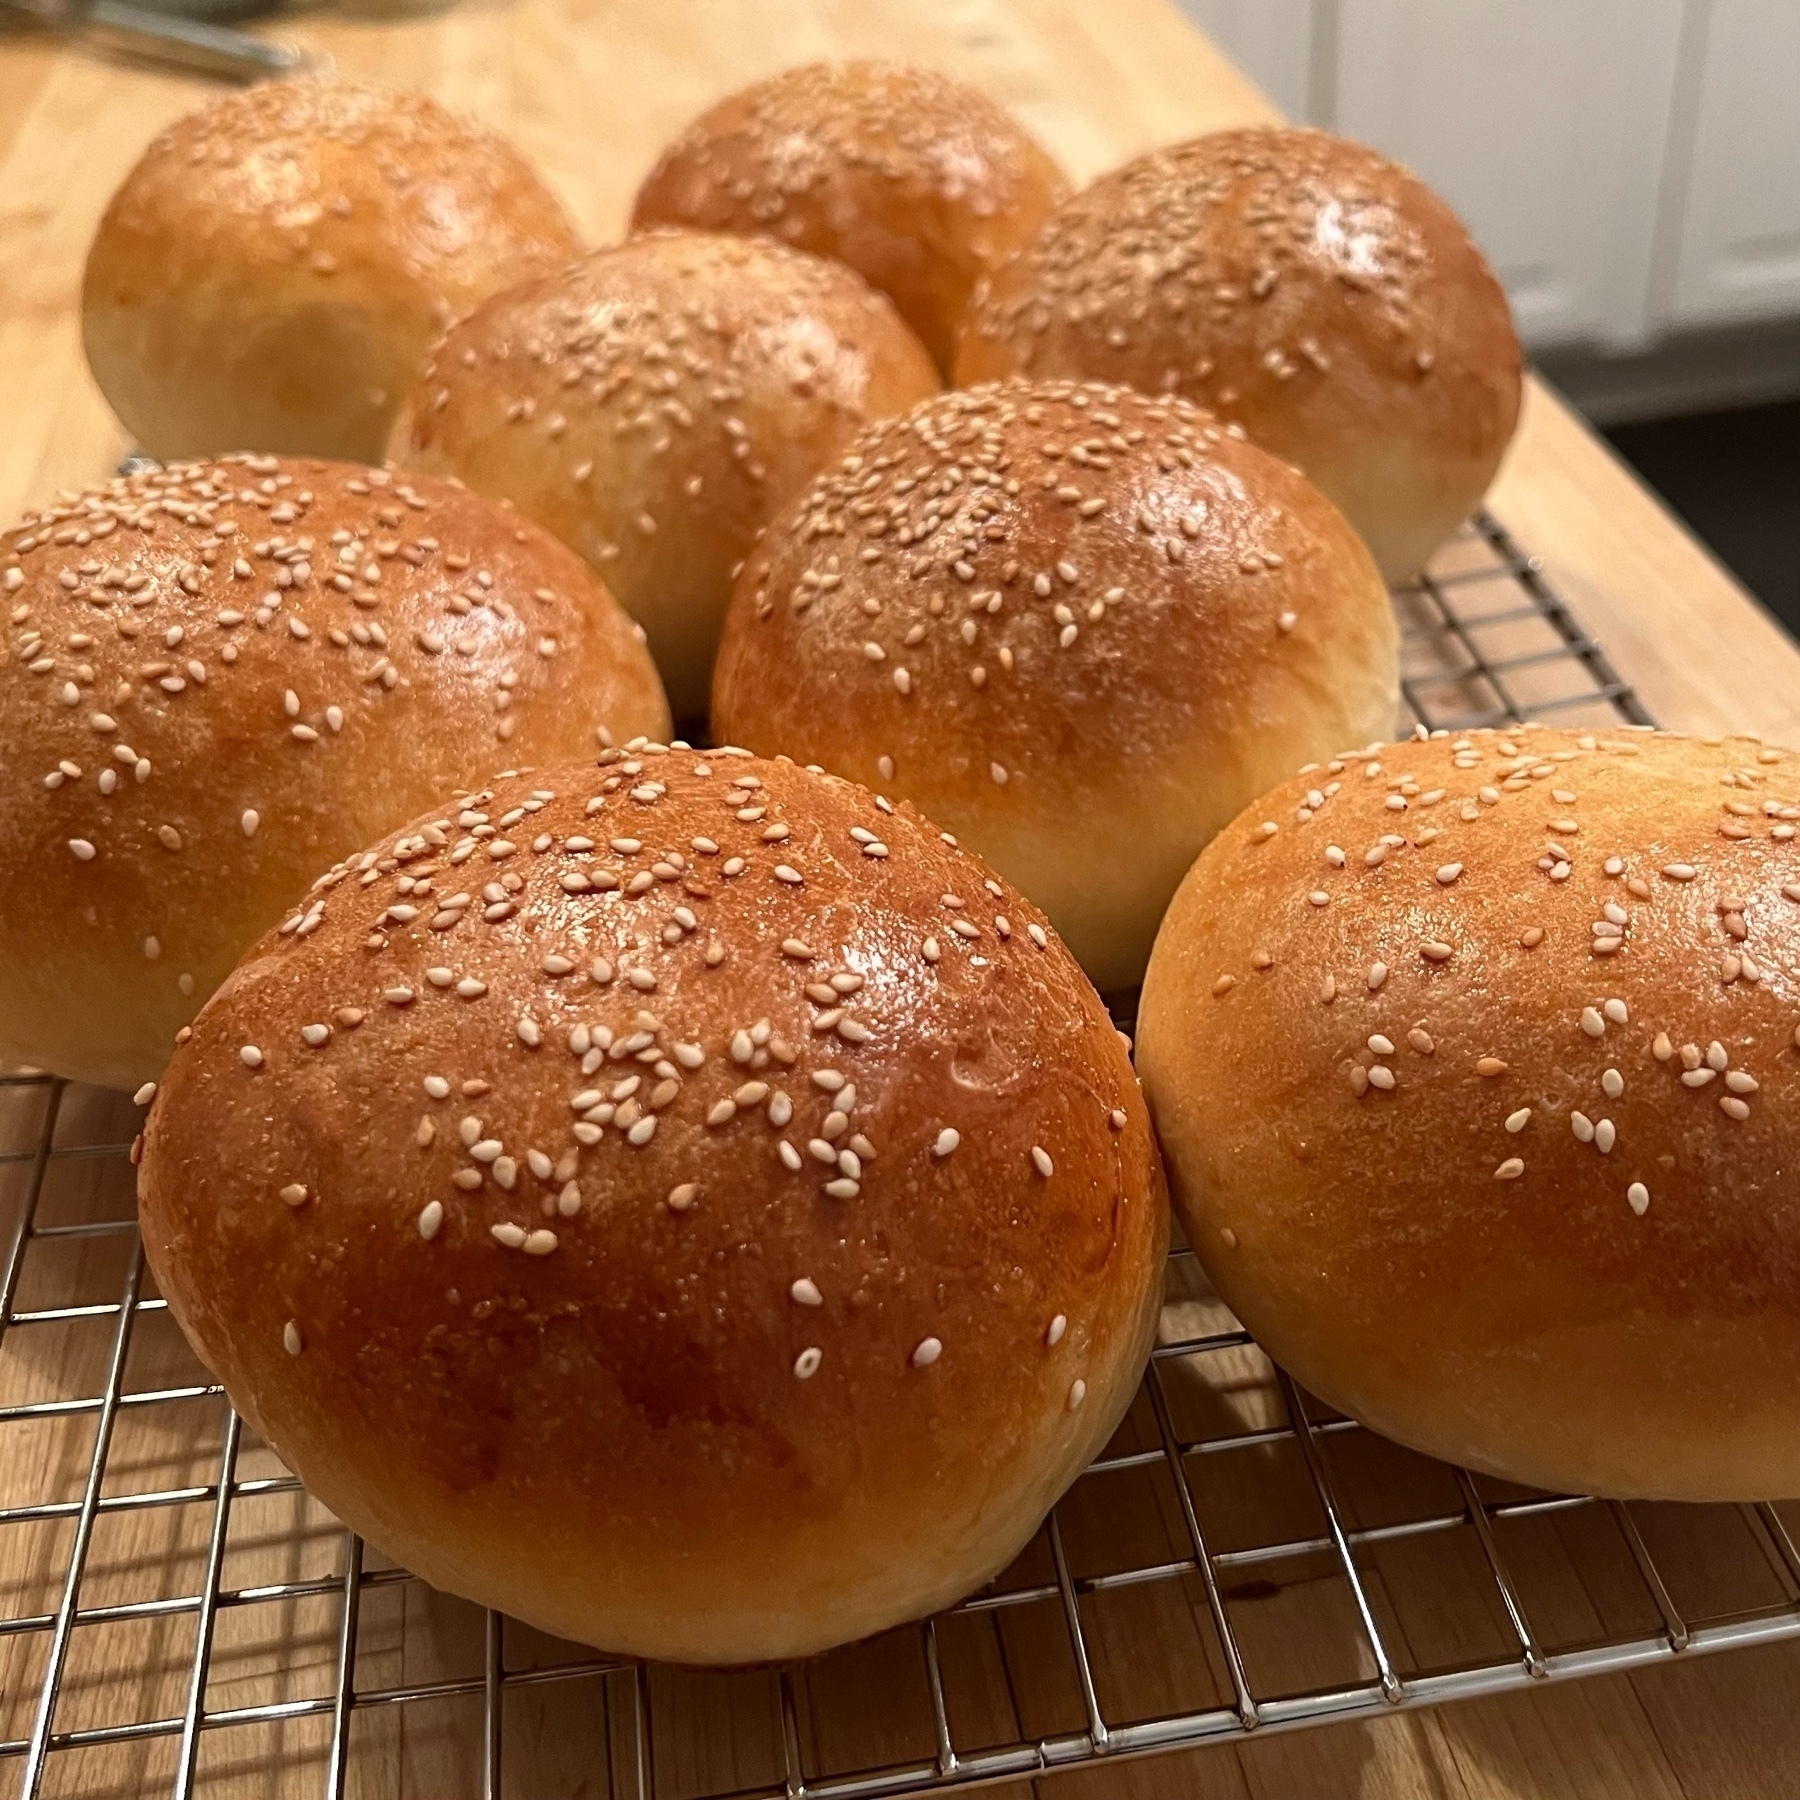 eight freshly baked buns with browned tops, sprinkled with sesame seeds. they are puffy almost to the point of being spherical